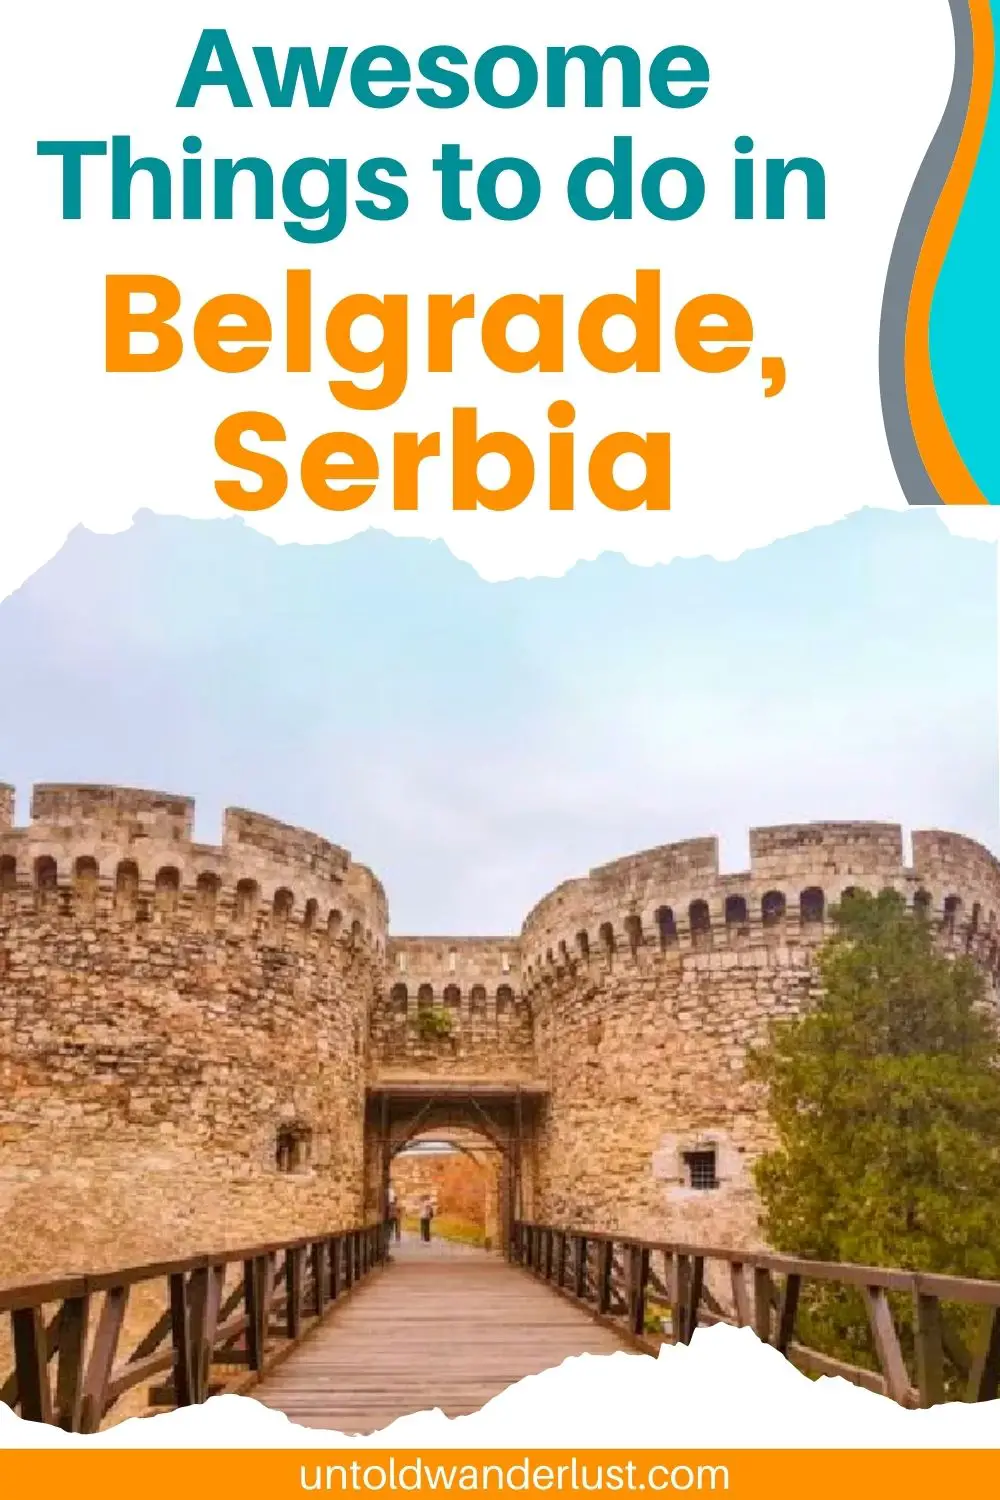 Belgrade, Serbia Travel Guide | The Best Things to do